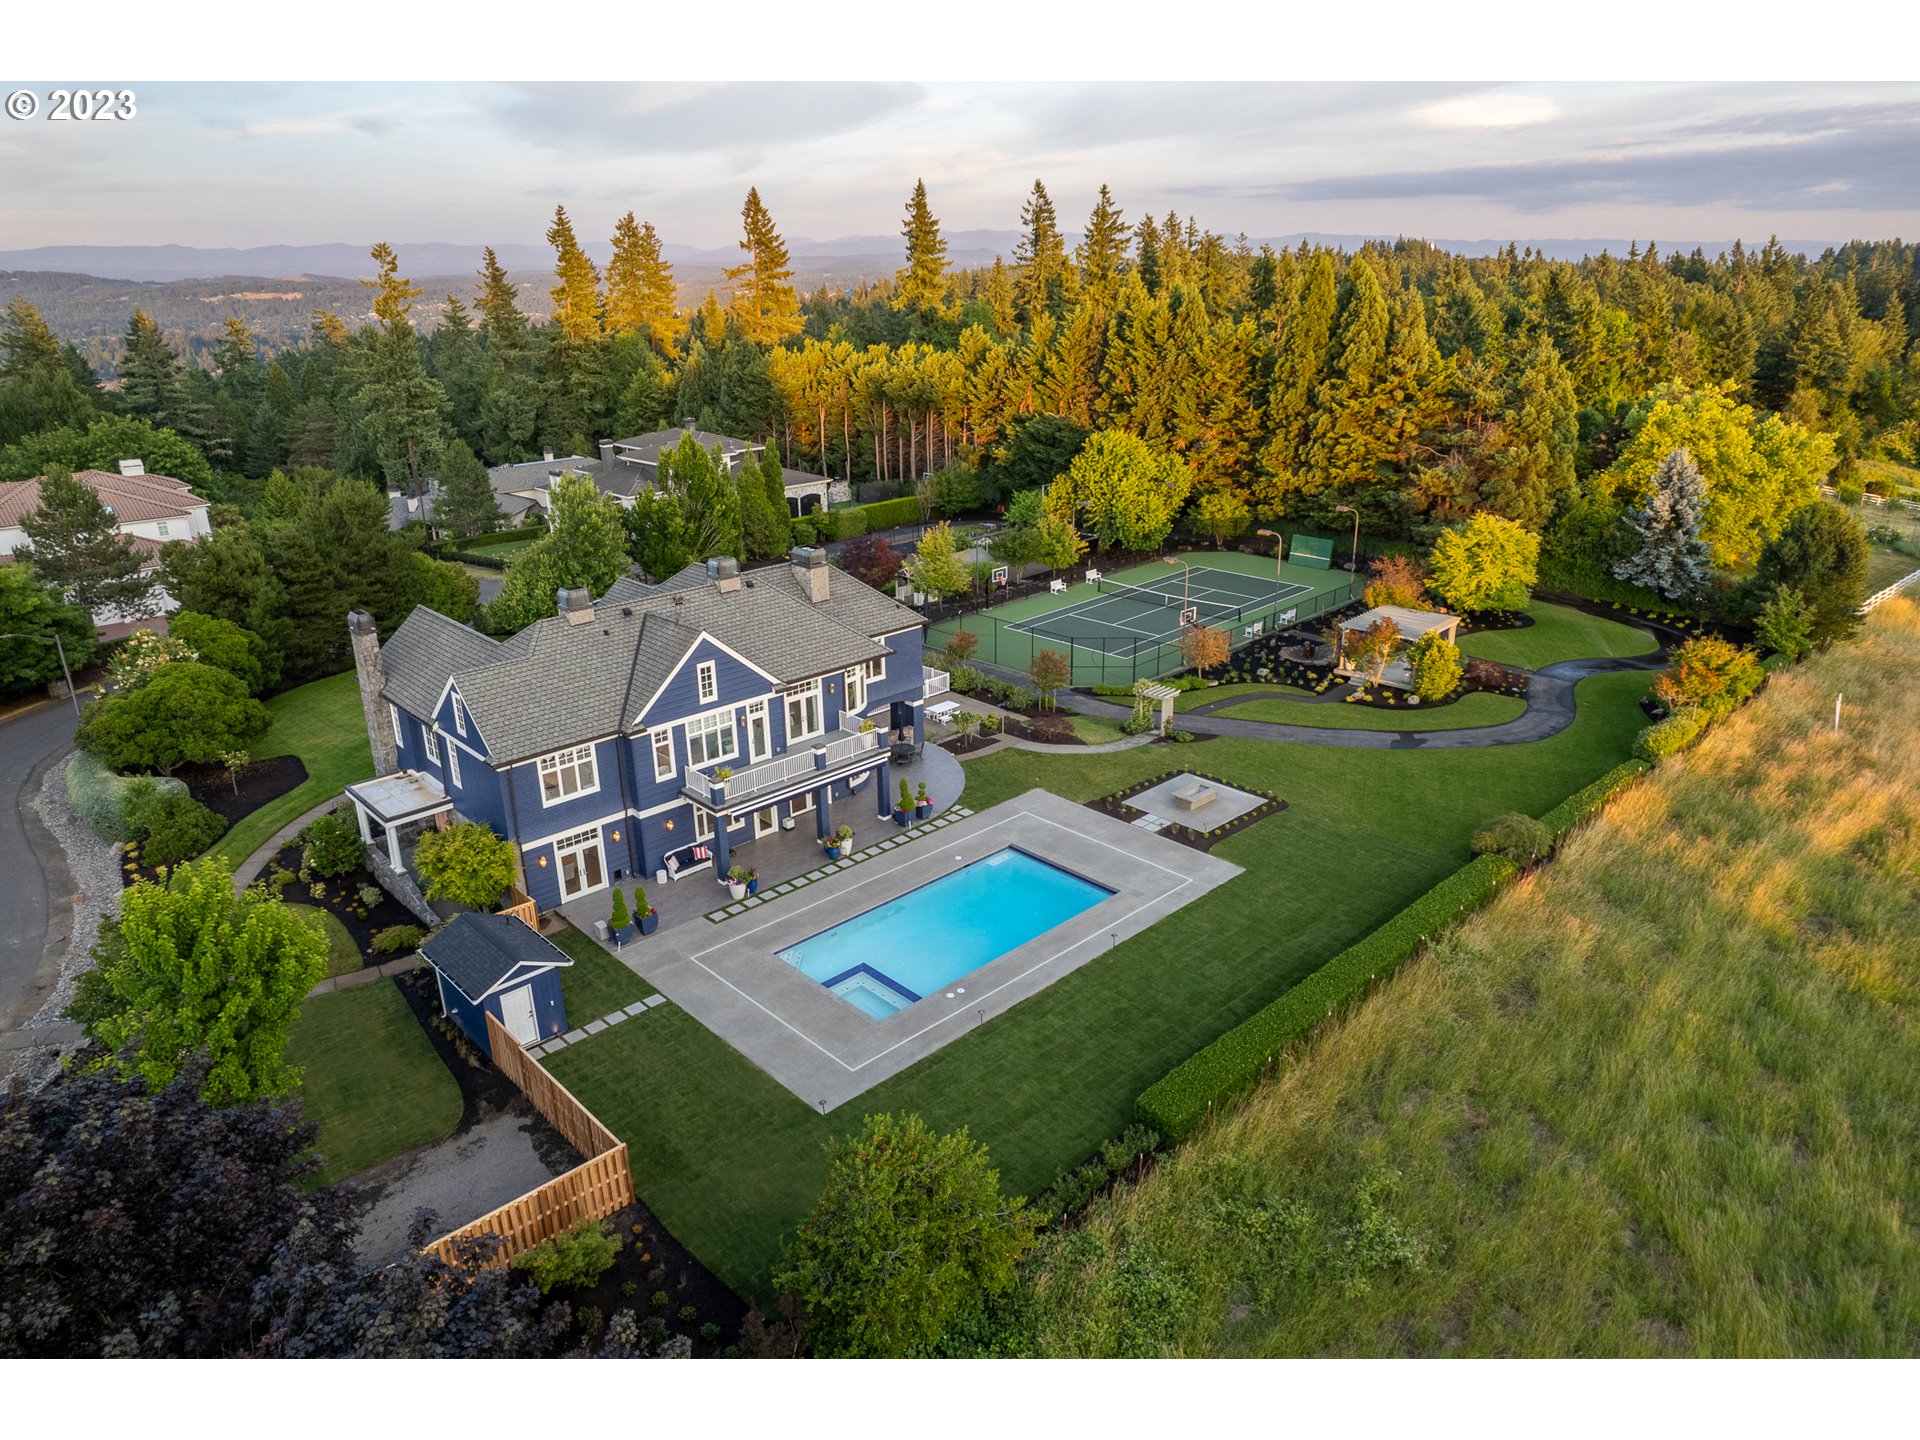 The epic Lake Oswego luxury lifestyle awaits in this pictorial Cape Cod wellness estate situated on 1 3/4 acres high atop the celebrated Skylands neighborhood! Revel in a newly installed 20x40' pool and spa gazing over staggering sunset and coastal range views, and surrounded by pristine patios, verdant lawns, a fire pit, gazebo, a regulation sized tennis/sport court, and 1/8 mile track - perfect for the outdoor lifestyle! Inside you'll delight in rich hardwoods, soaring ceilings, integrated Control4 whole-home technology, fine designer finishes, and 2 stunning great rooms accessing the private lawns and covered pool verandas. The gourmet kitchen featuring Wolf and Miele appliances and the generous 2nd dining space opening to the relaxing family room that overlooks the pool and unmatched grounds. You'll have absolutely every amenity imaginable with 2 main level executive offices, a wine cellar, generator, bonus craft and media rooms, and 5 gorgeous bedroom suites. The splendid primary suite enjoys the expansive views and a private balcony, heated spa bathroom floors, and pedestal tub. While guest and family accommodations abound, this wonderfully warm and welcoming home lives with all the comfort and elegant grace of a beloved legacy estate. Create culinary magic from the fenced kitchen gardens and raised beds. Make a lifetime of memories with summer parties, holiday retreats, and milestone events in this marvelous estate.